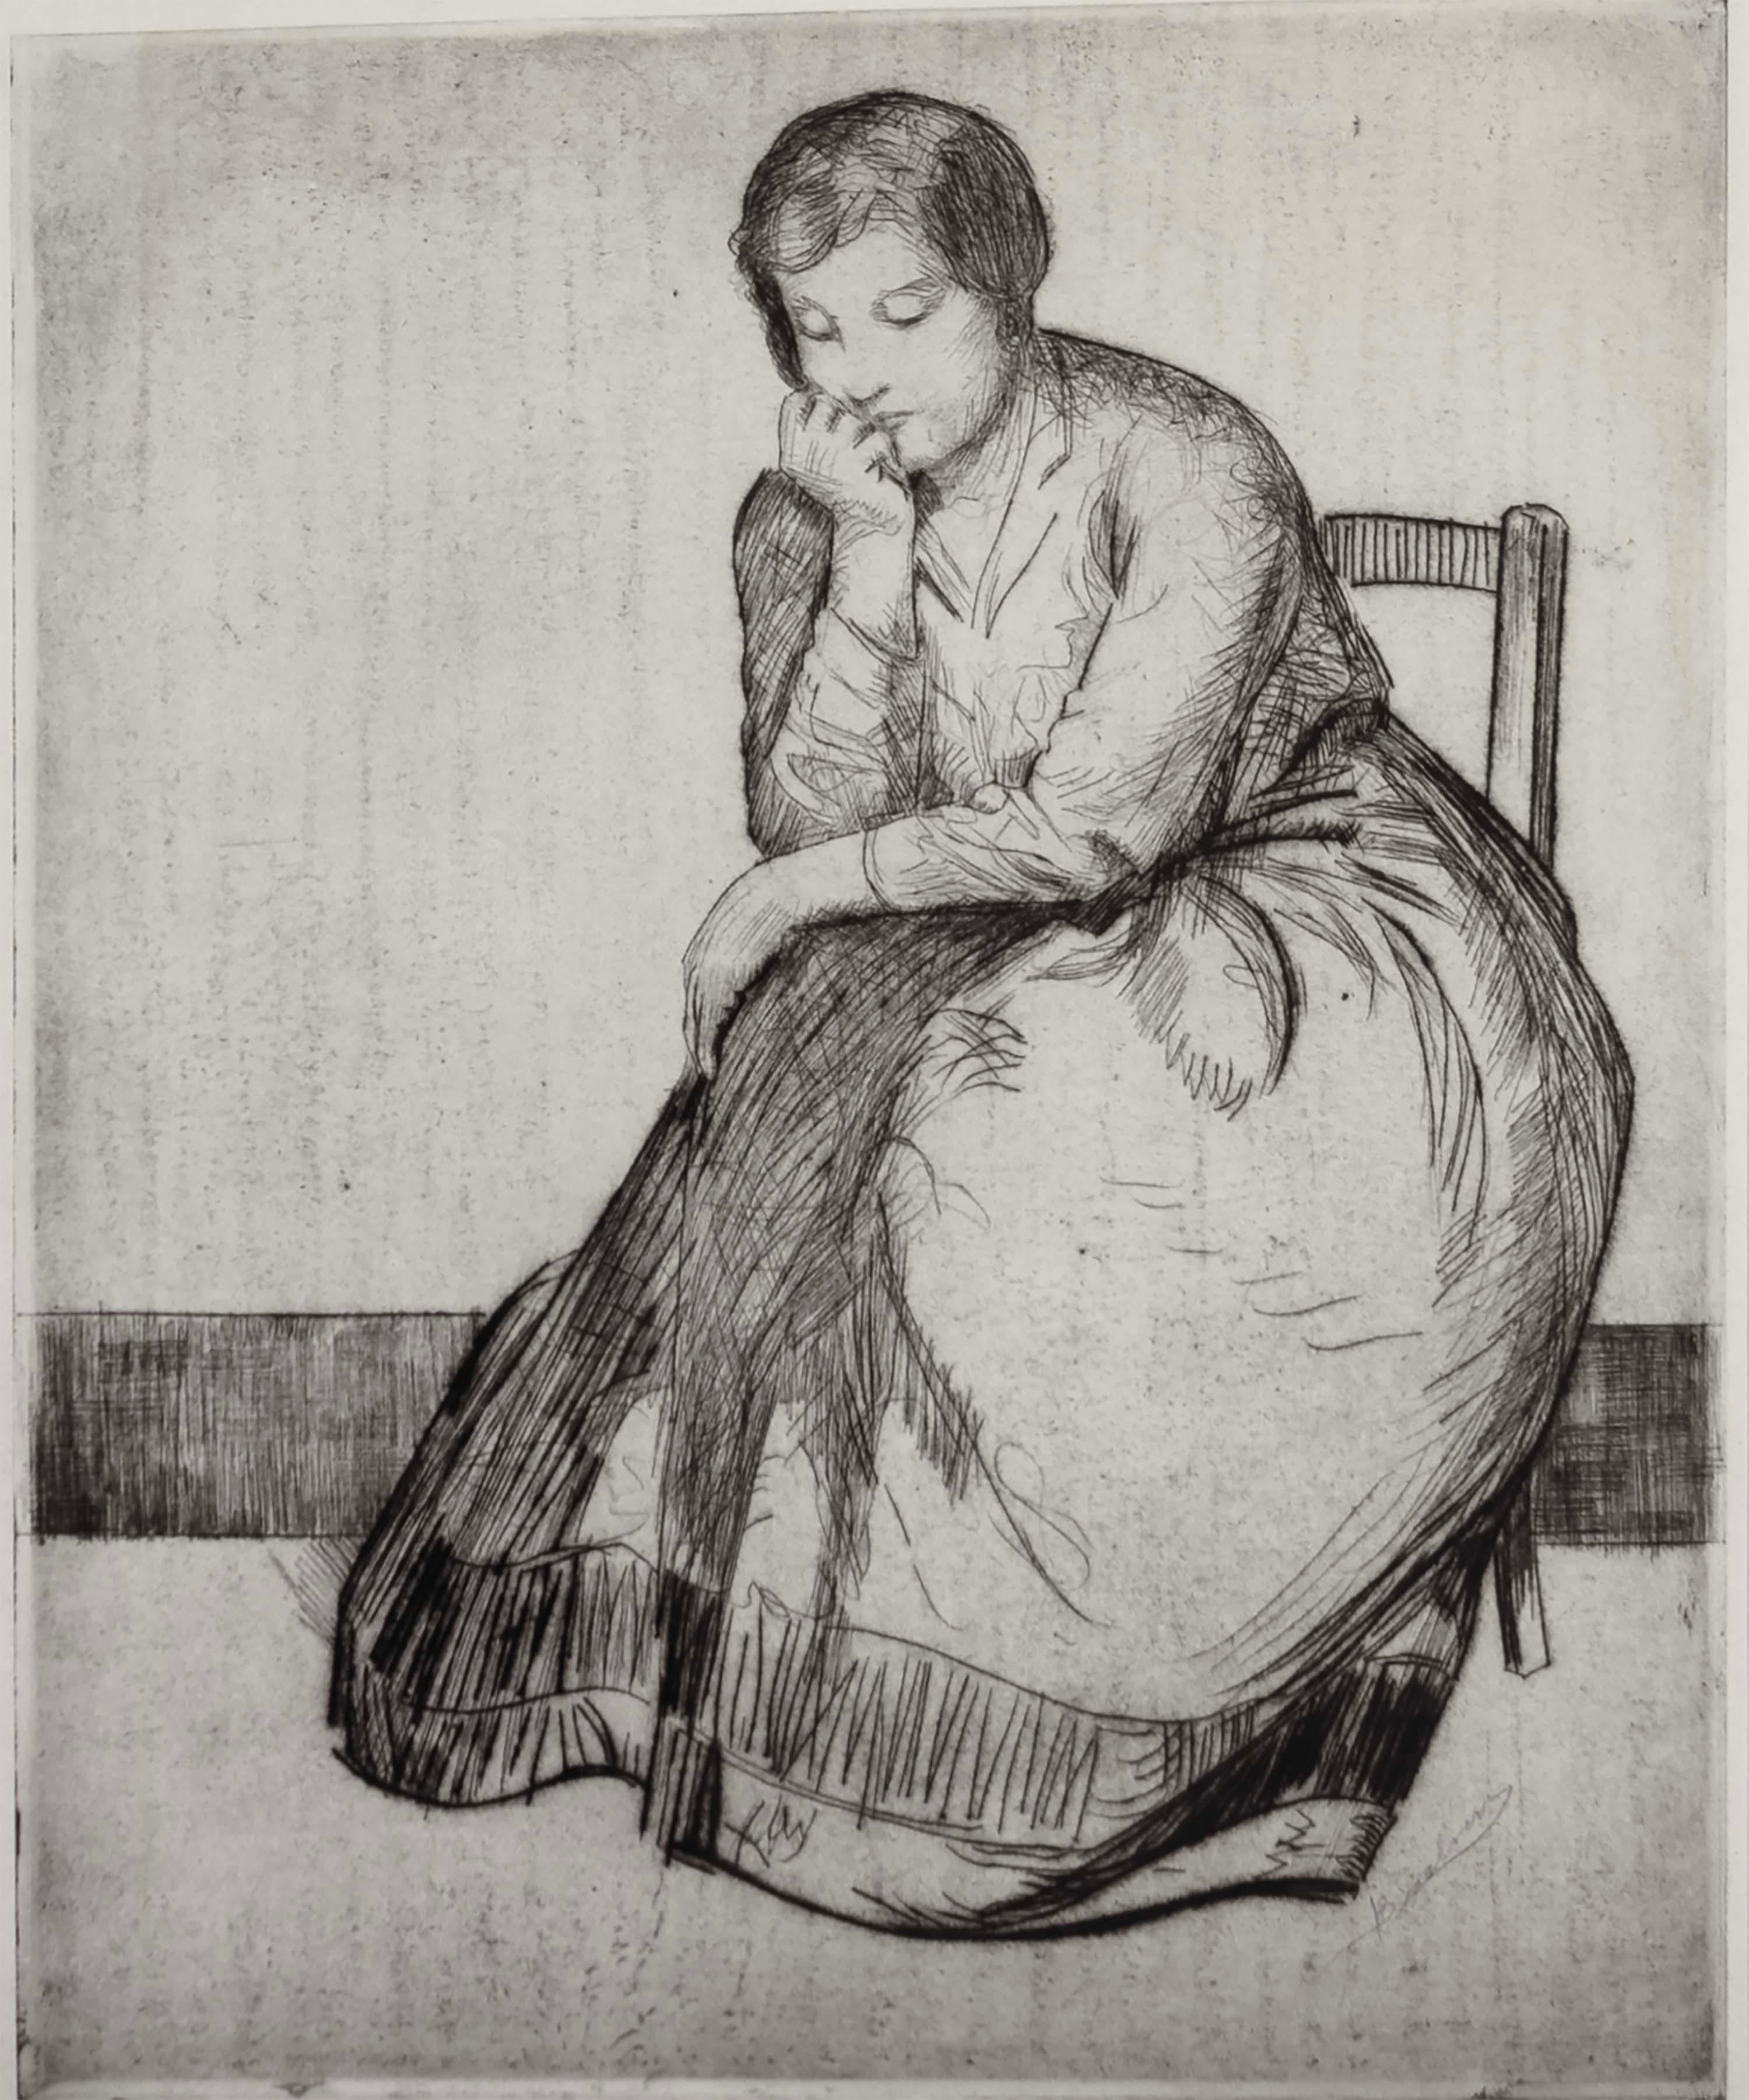 A sentimental etching on paper depicting a seated woman by American artist Myron Barlow (1873-1937). Hand signed in pencil on the bottom right. A lovely depiction of American Realism, circa 1910-1920s. From a private collection. Dimensions: 26.75”h